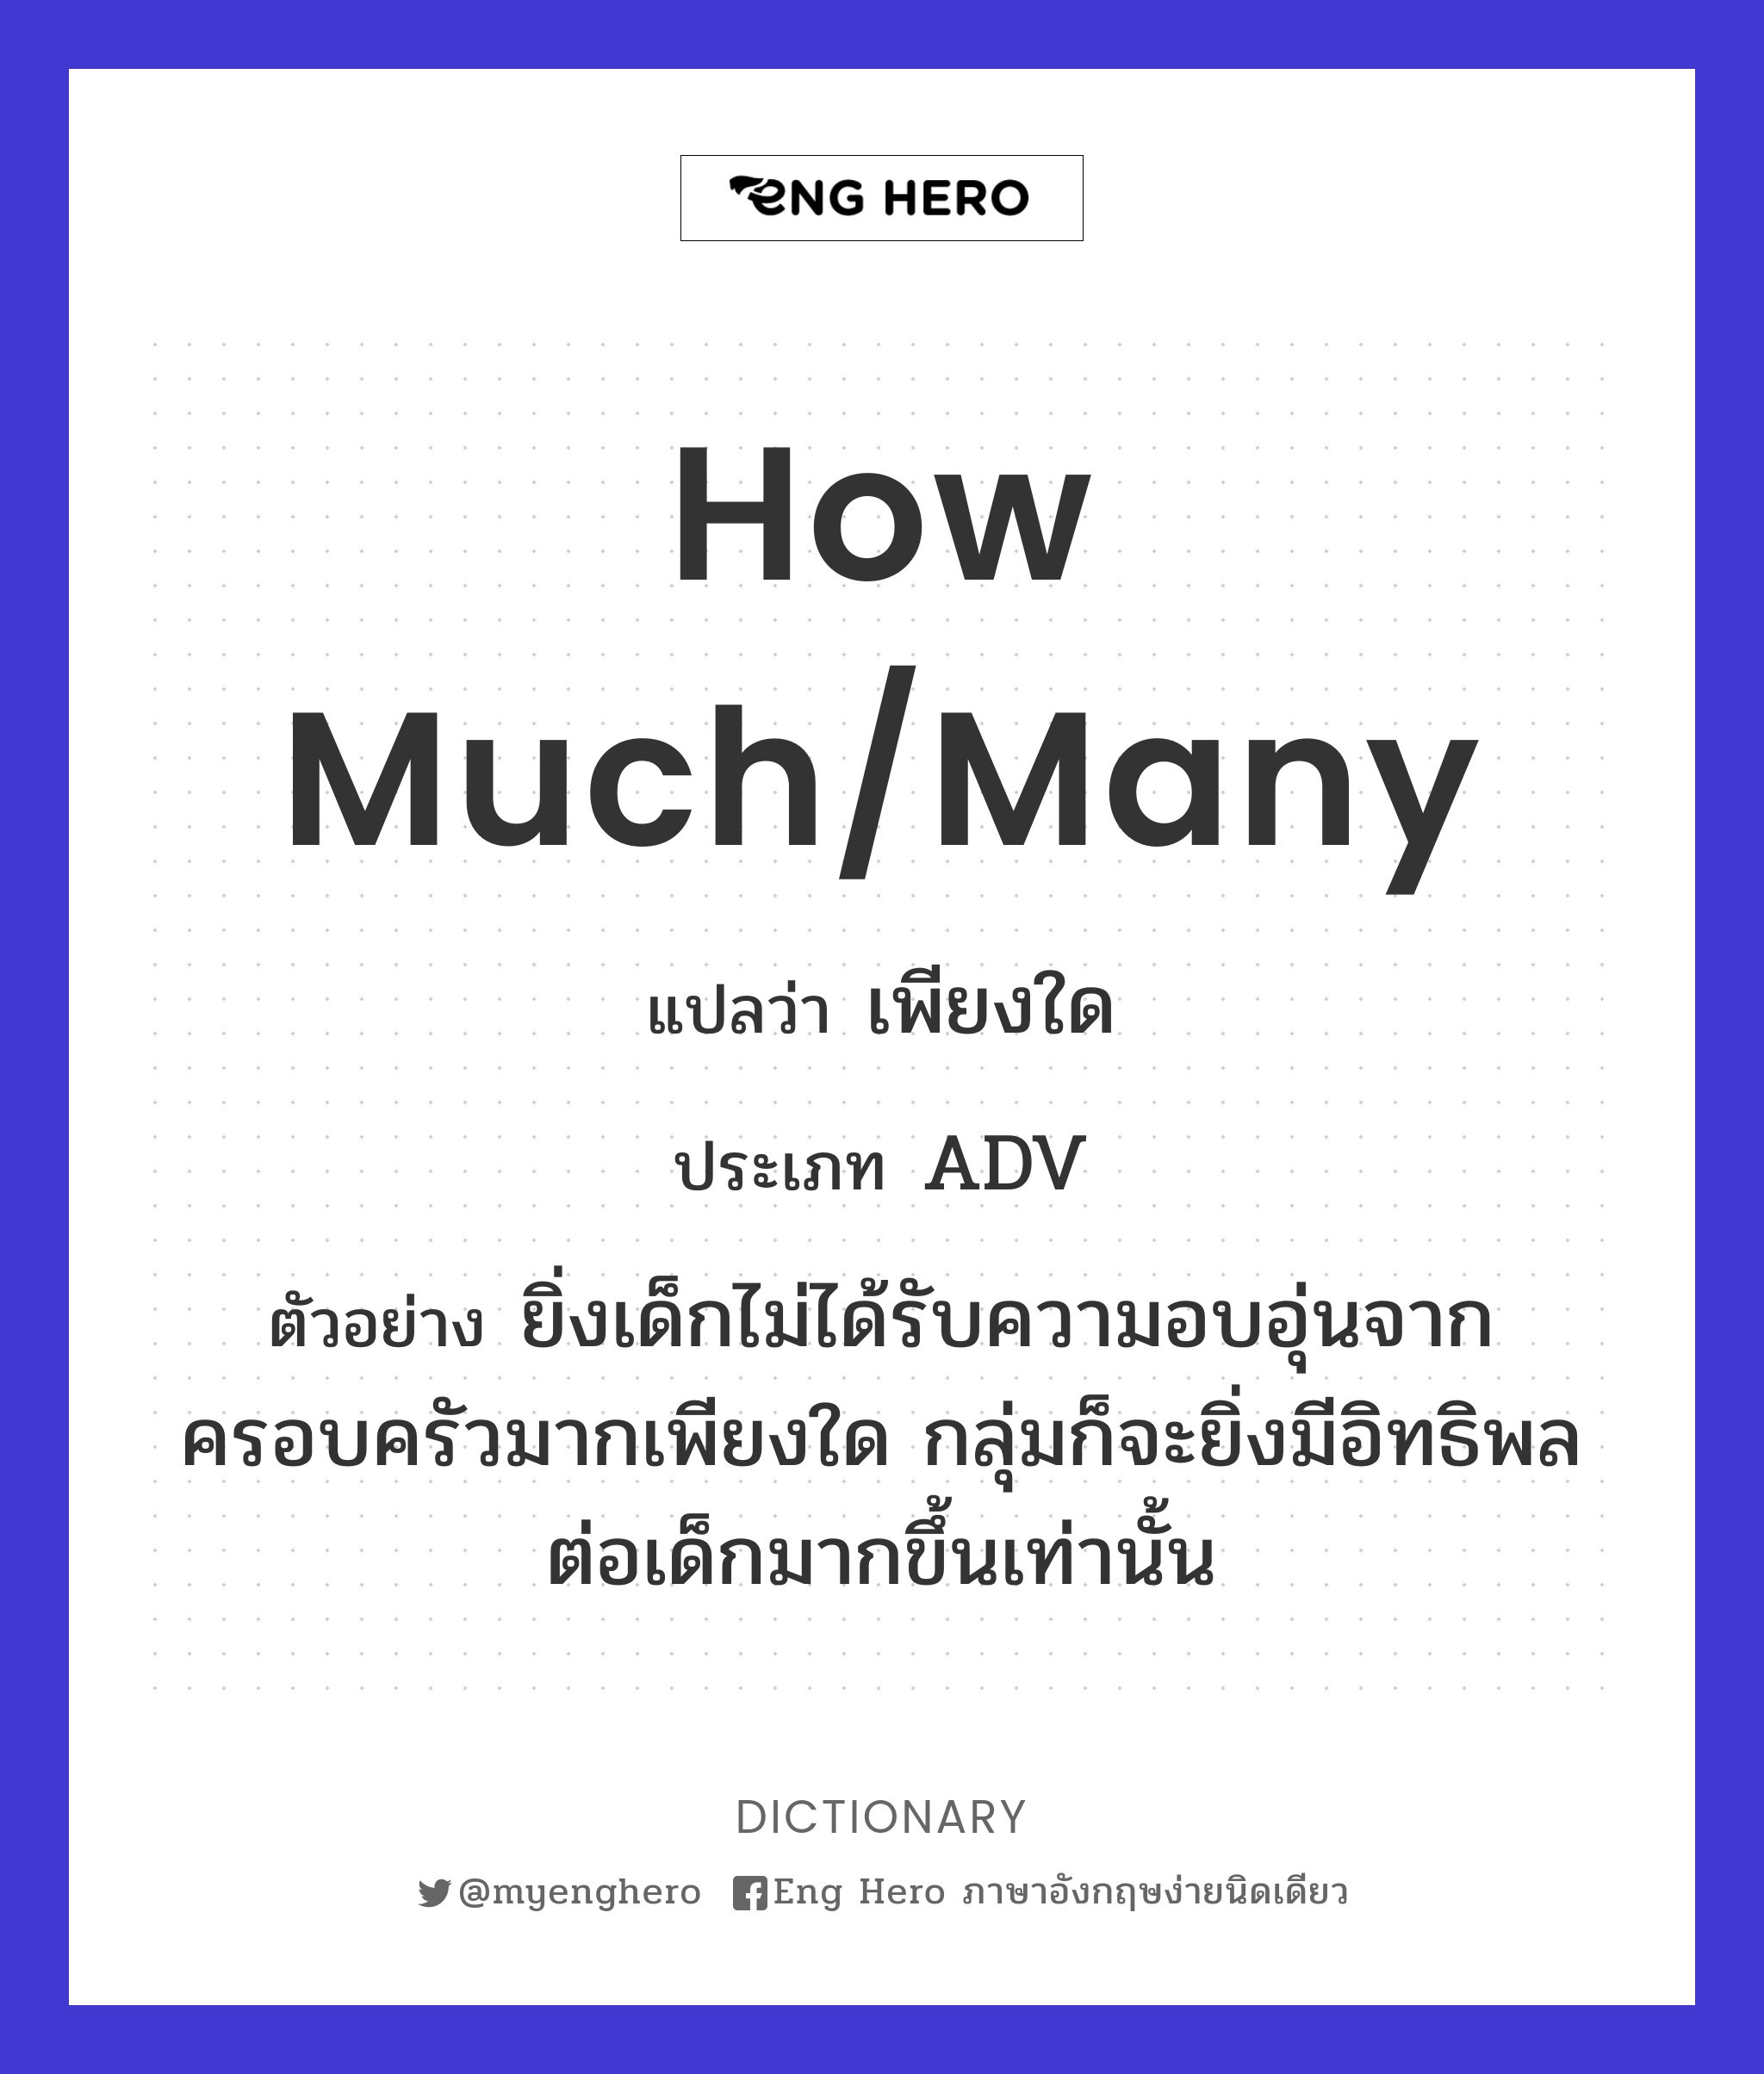 how much/many